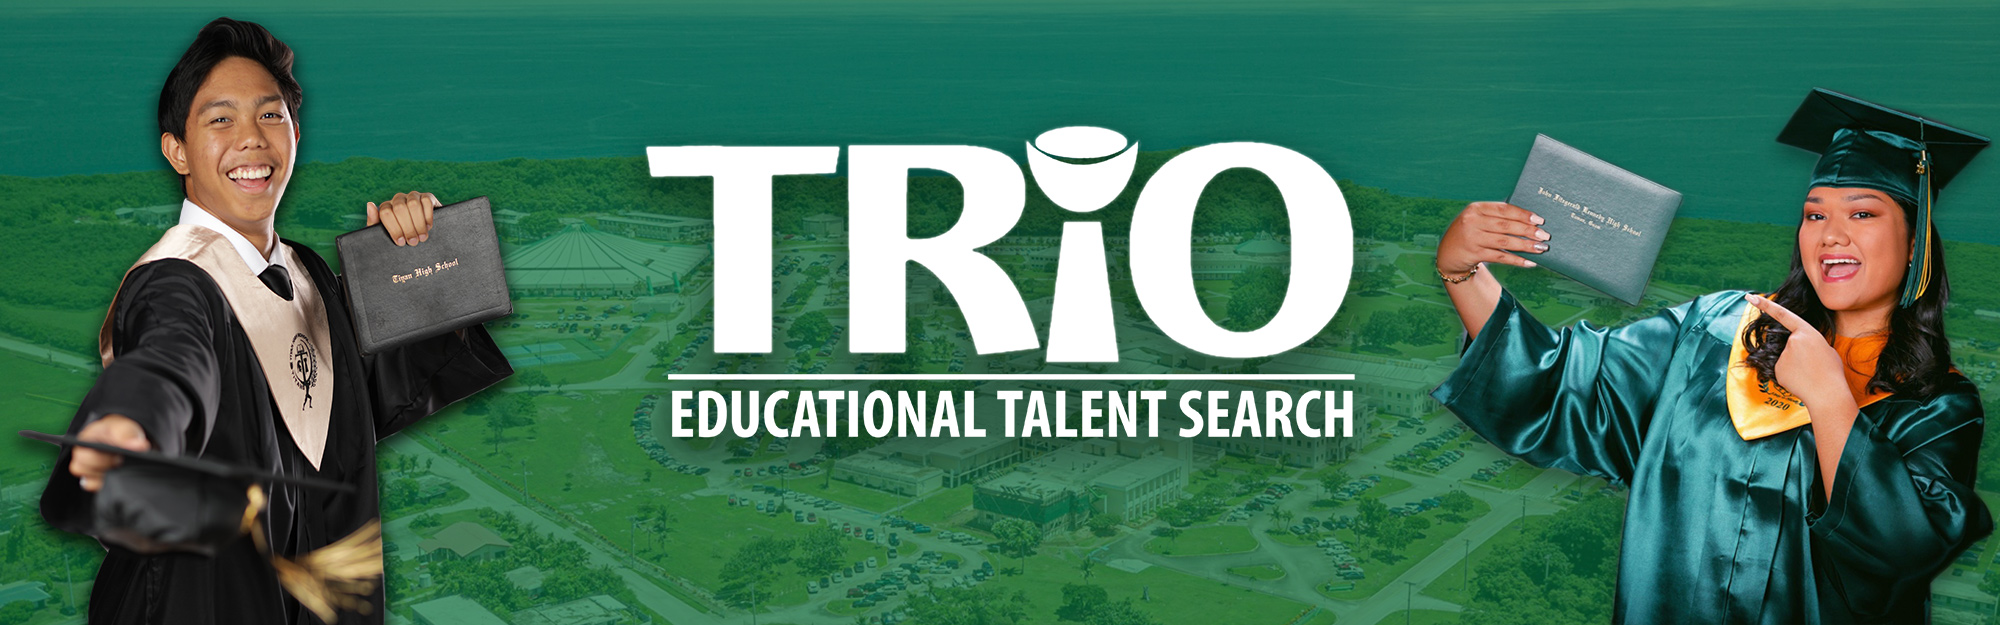 TRIO Educational Talent Search banner